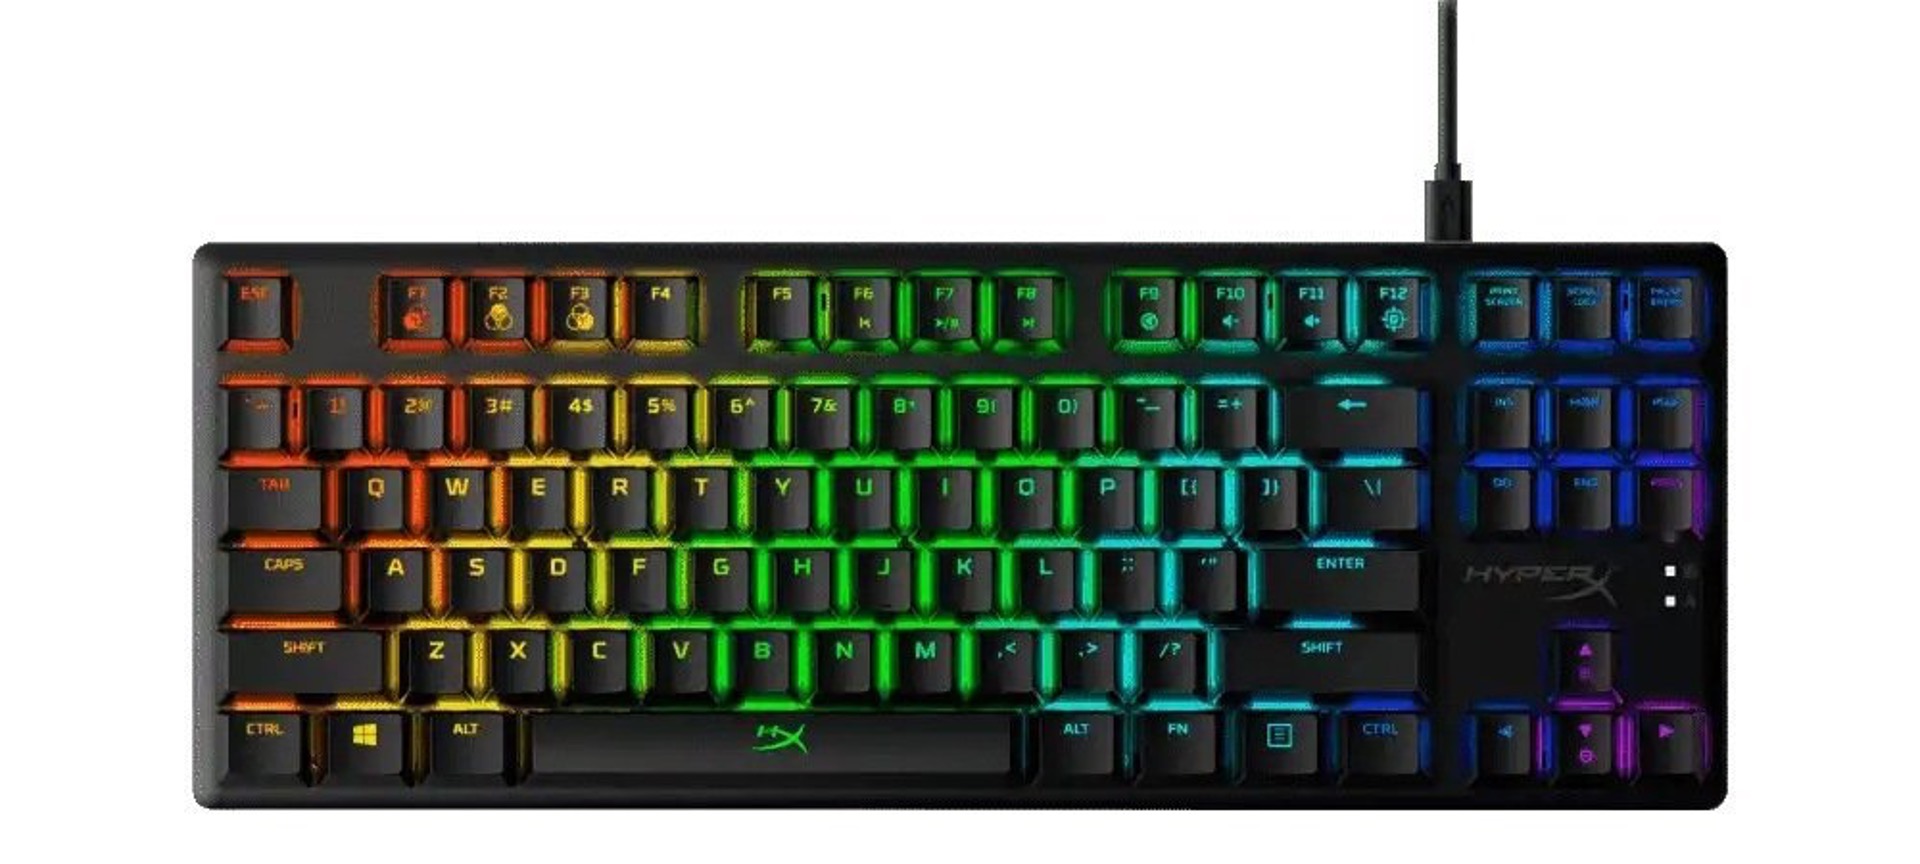 How To Put The Key On A Gaming Keyboard